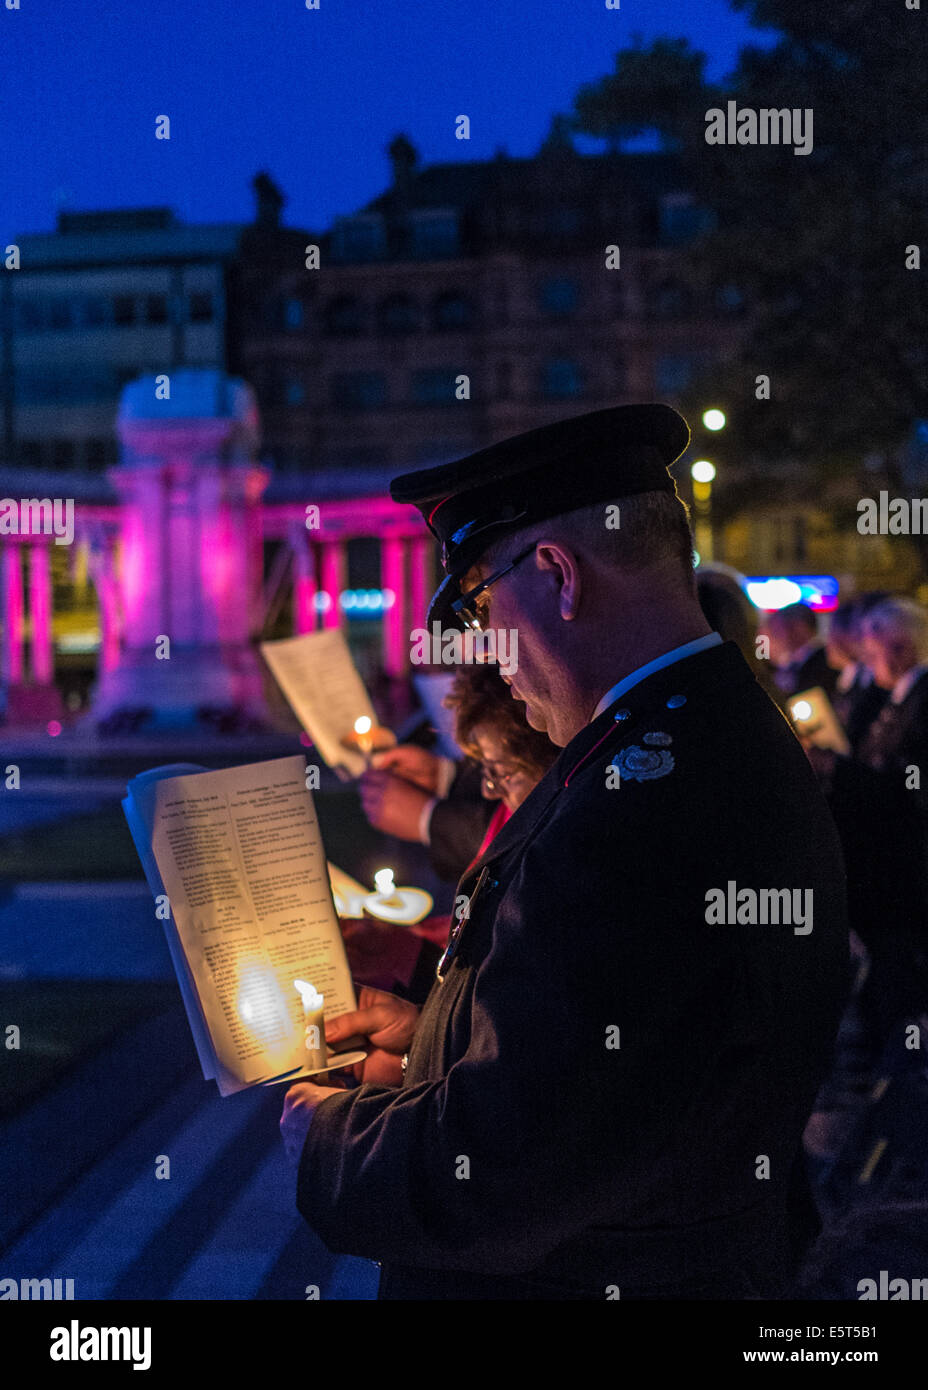 WW1 Candlelight vigil at Belfast City Hall.  Uniformed officer from Northern Ireland Fire Brigade stands with lighted candle. Stock Photo